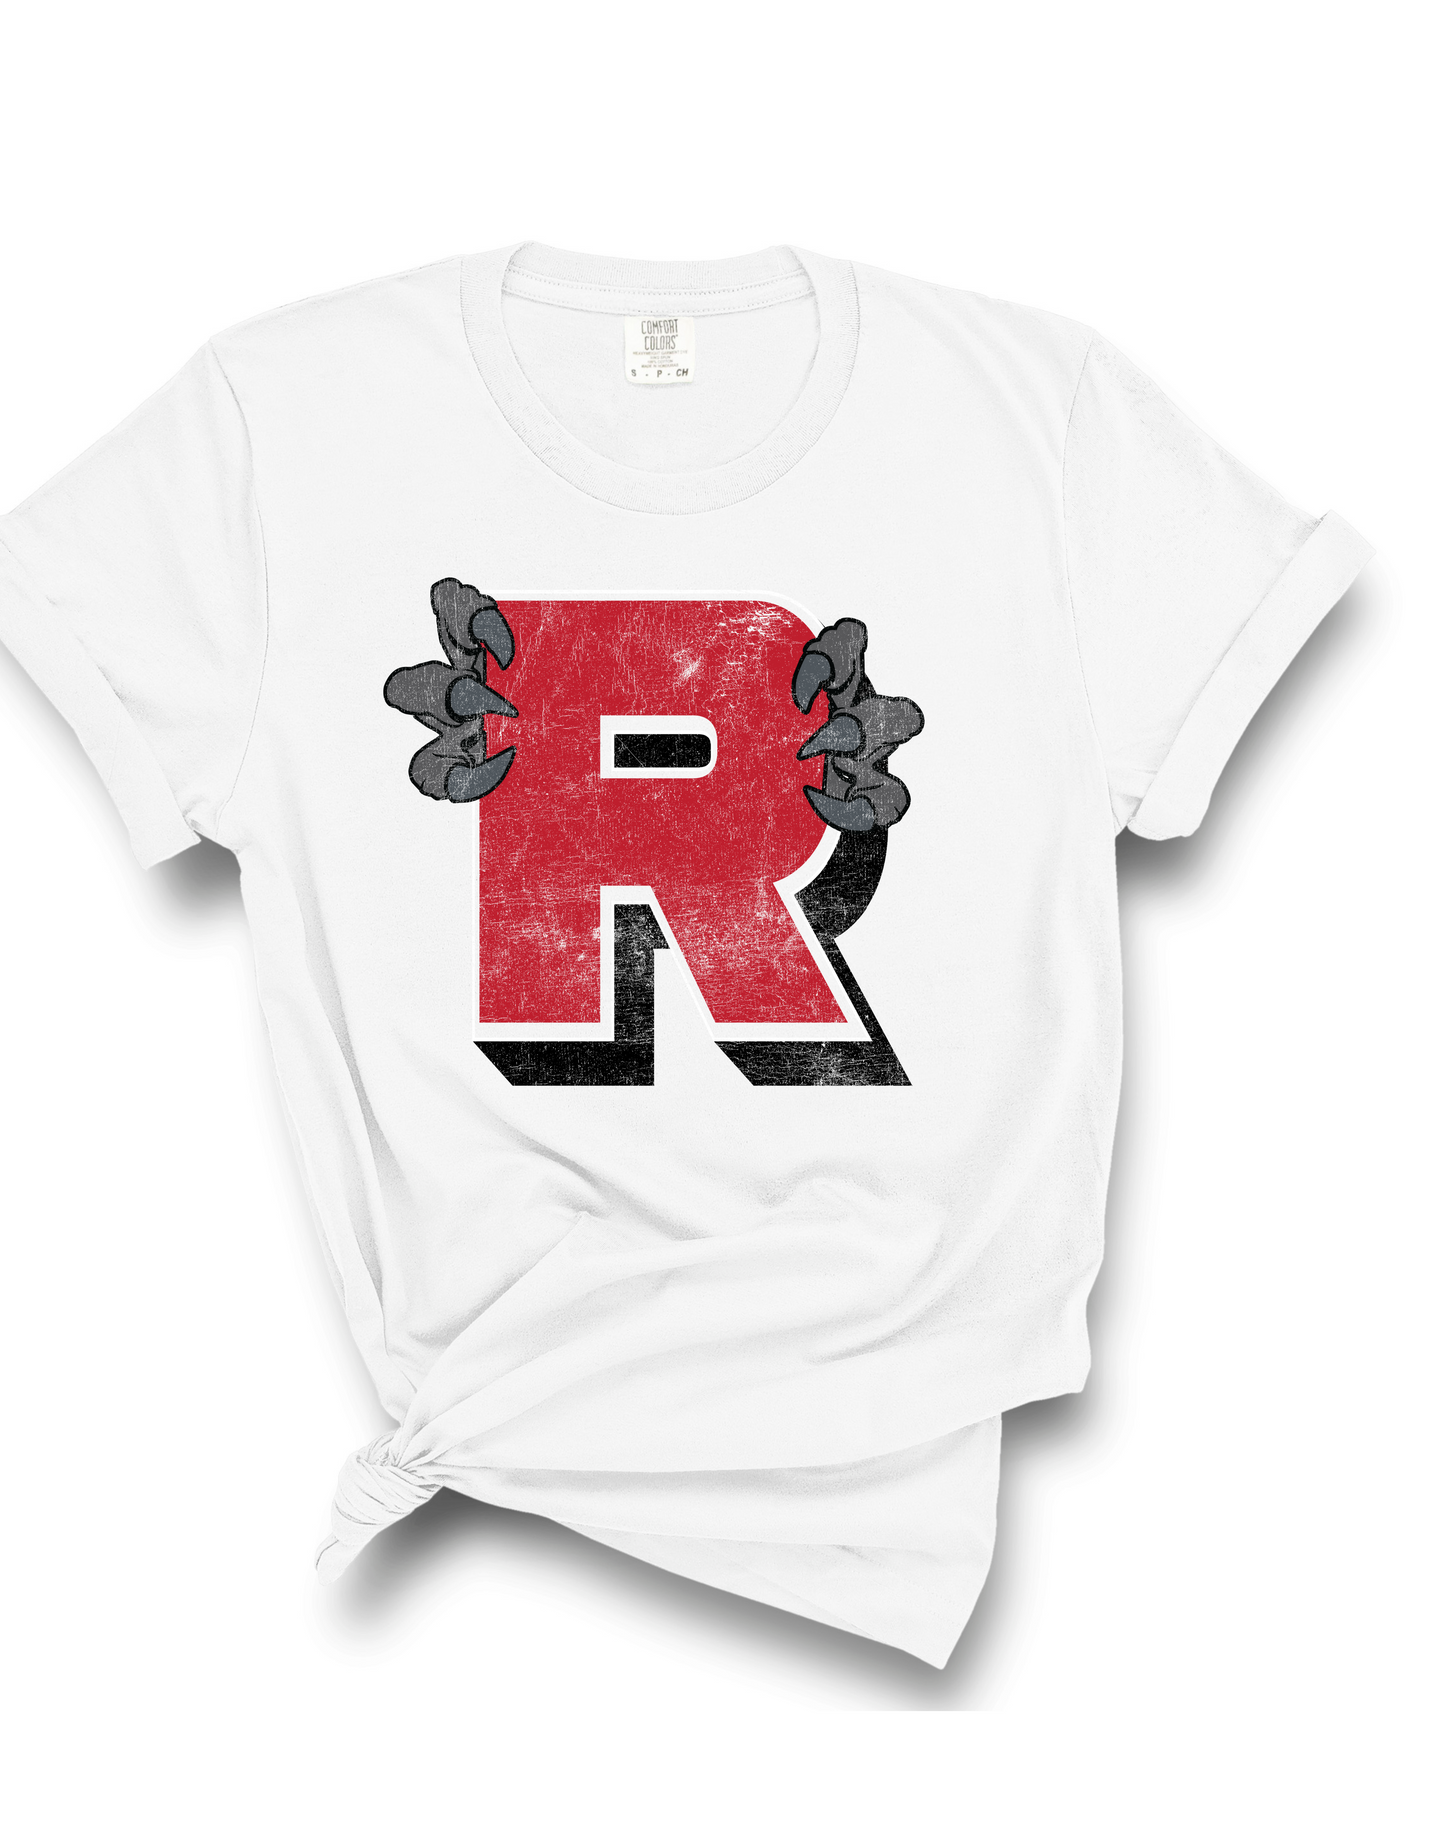 YOUTH OM Raptors Get your Claws out T'shirts Red or Pink "R"